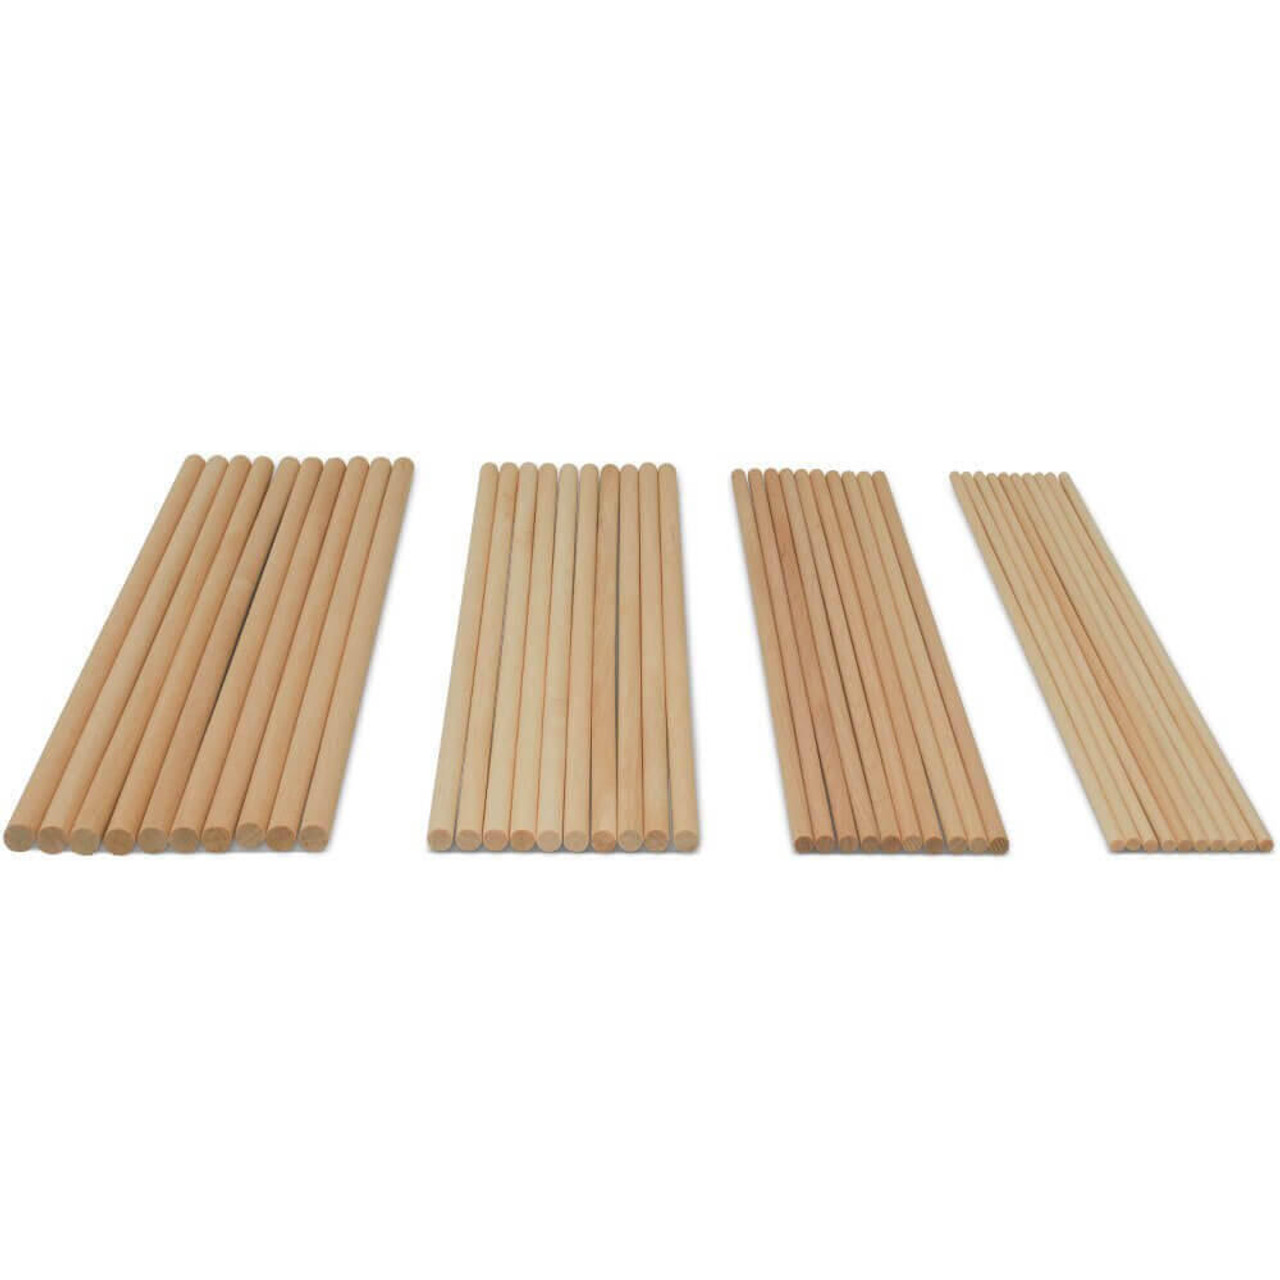 Assorted Wooden Dowels 12-inches Long | Woodpeckers Crafts